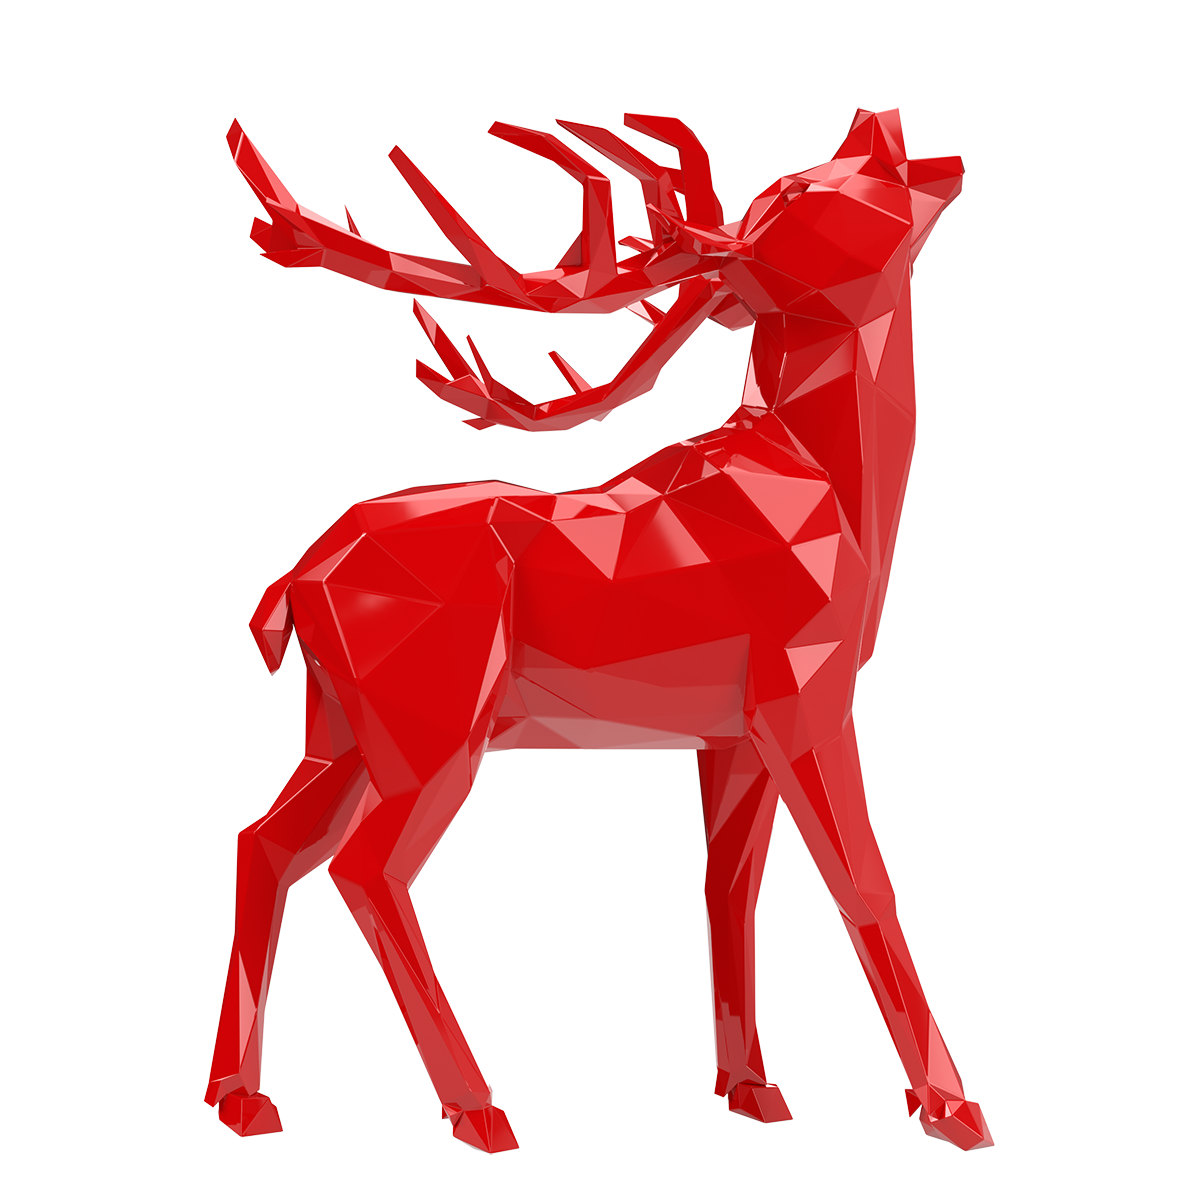 Sculpture of a red stag